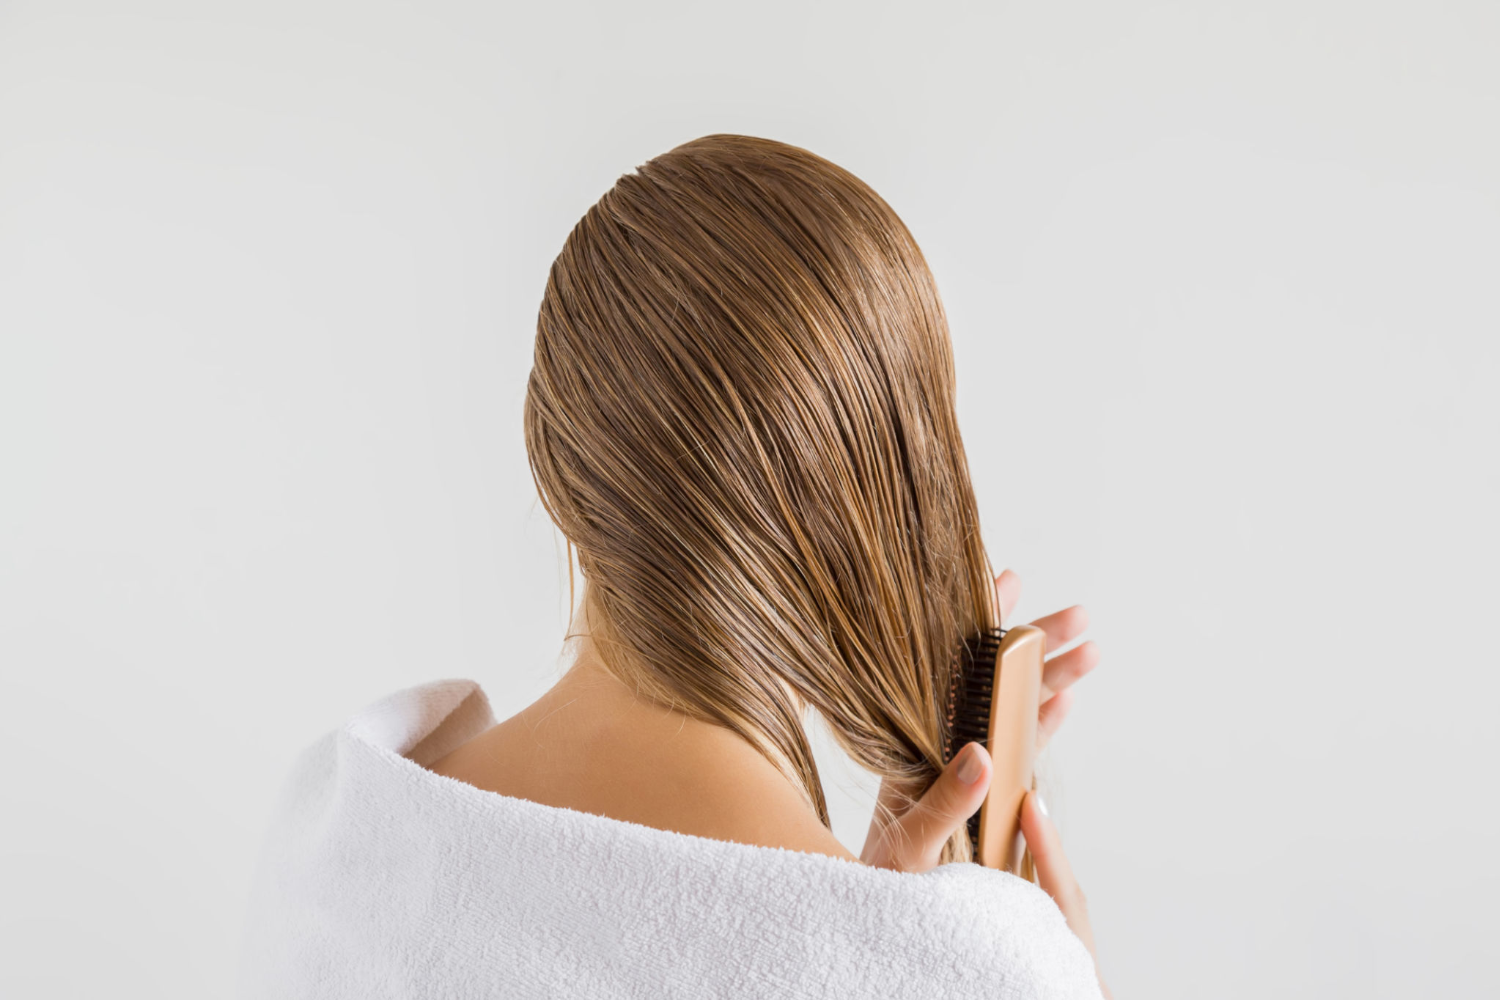 Apple Cider Vinegar Hair Rinse: How to Get Silky, Shiny Hair at Home